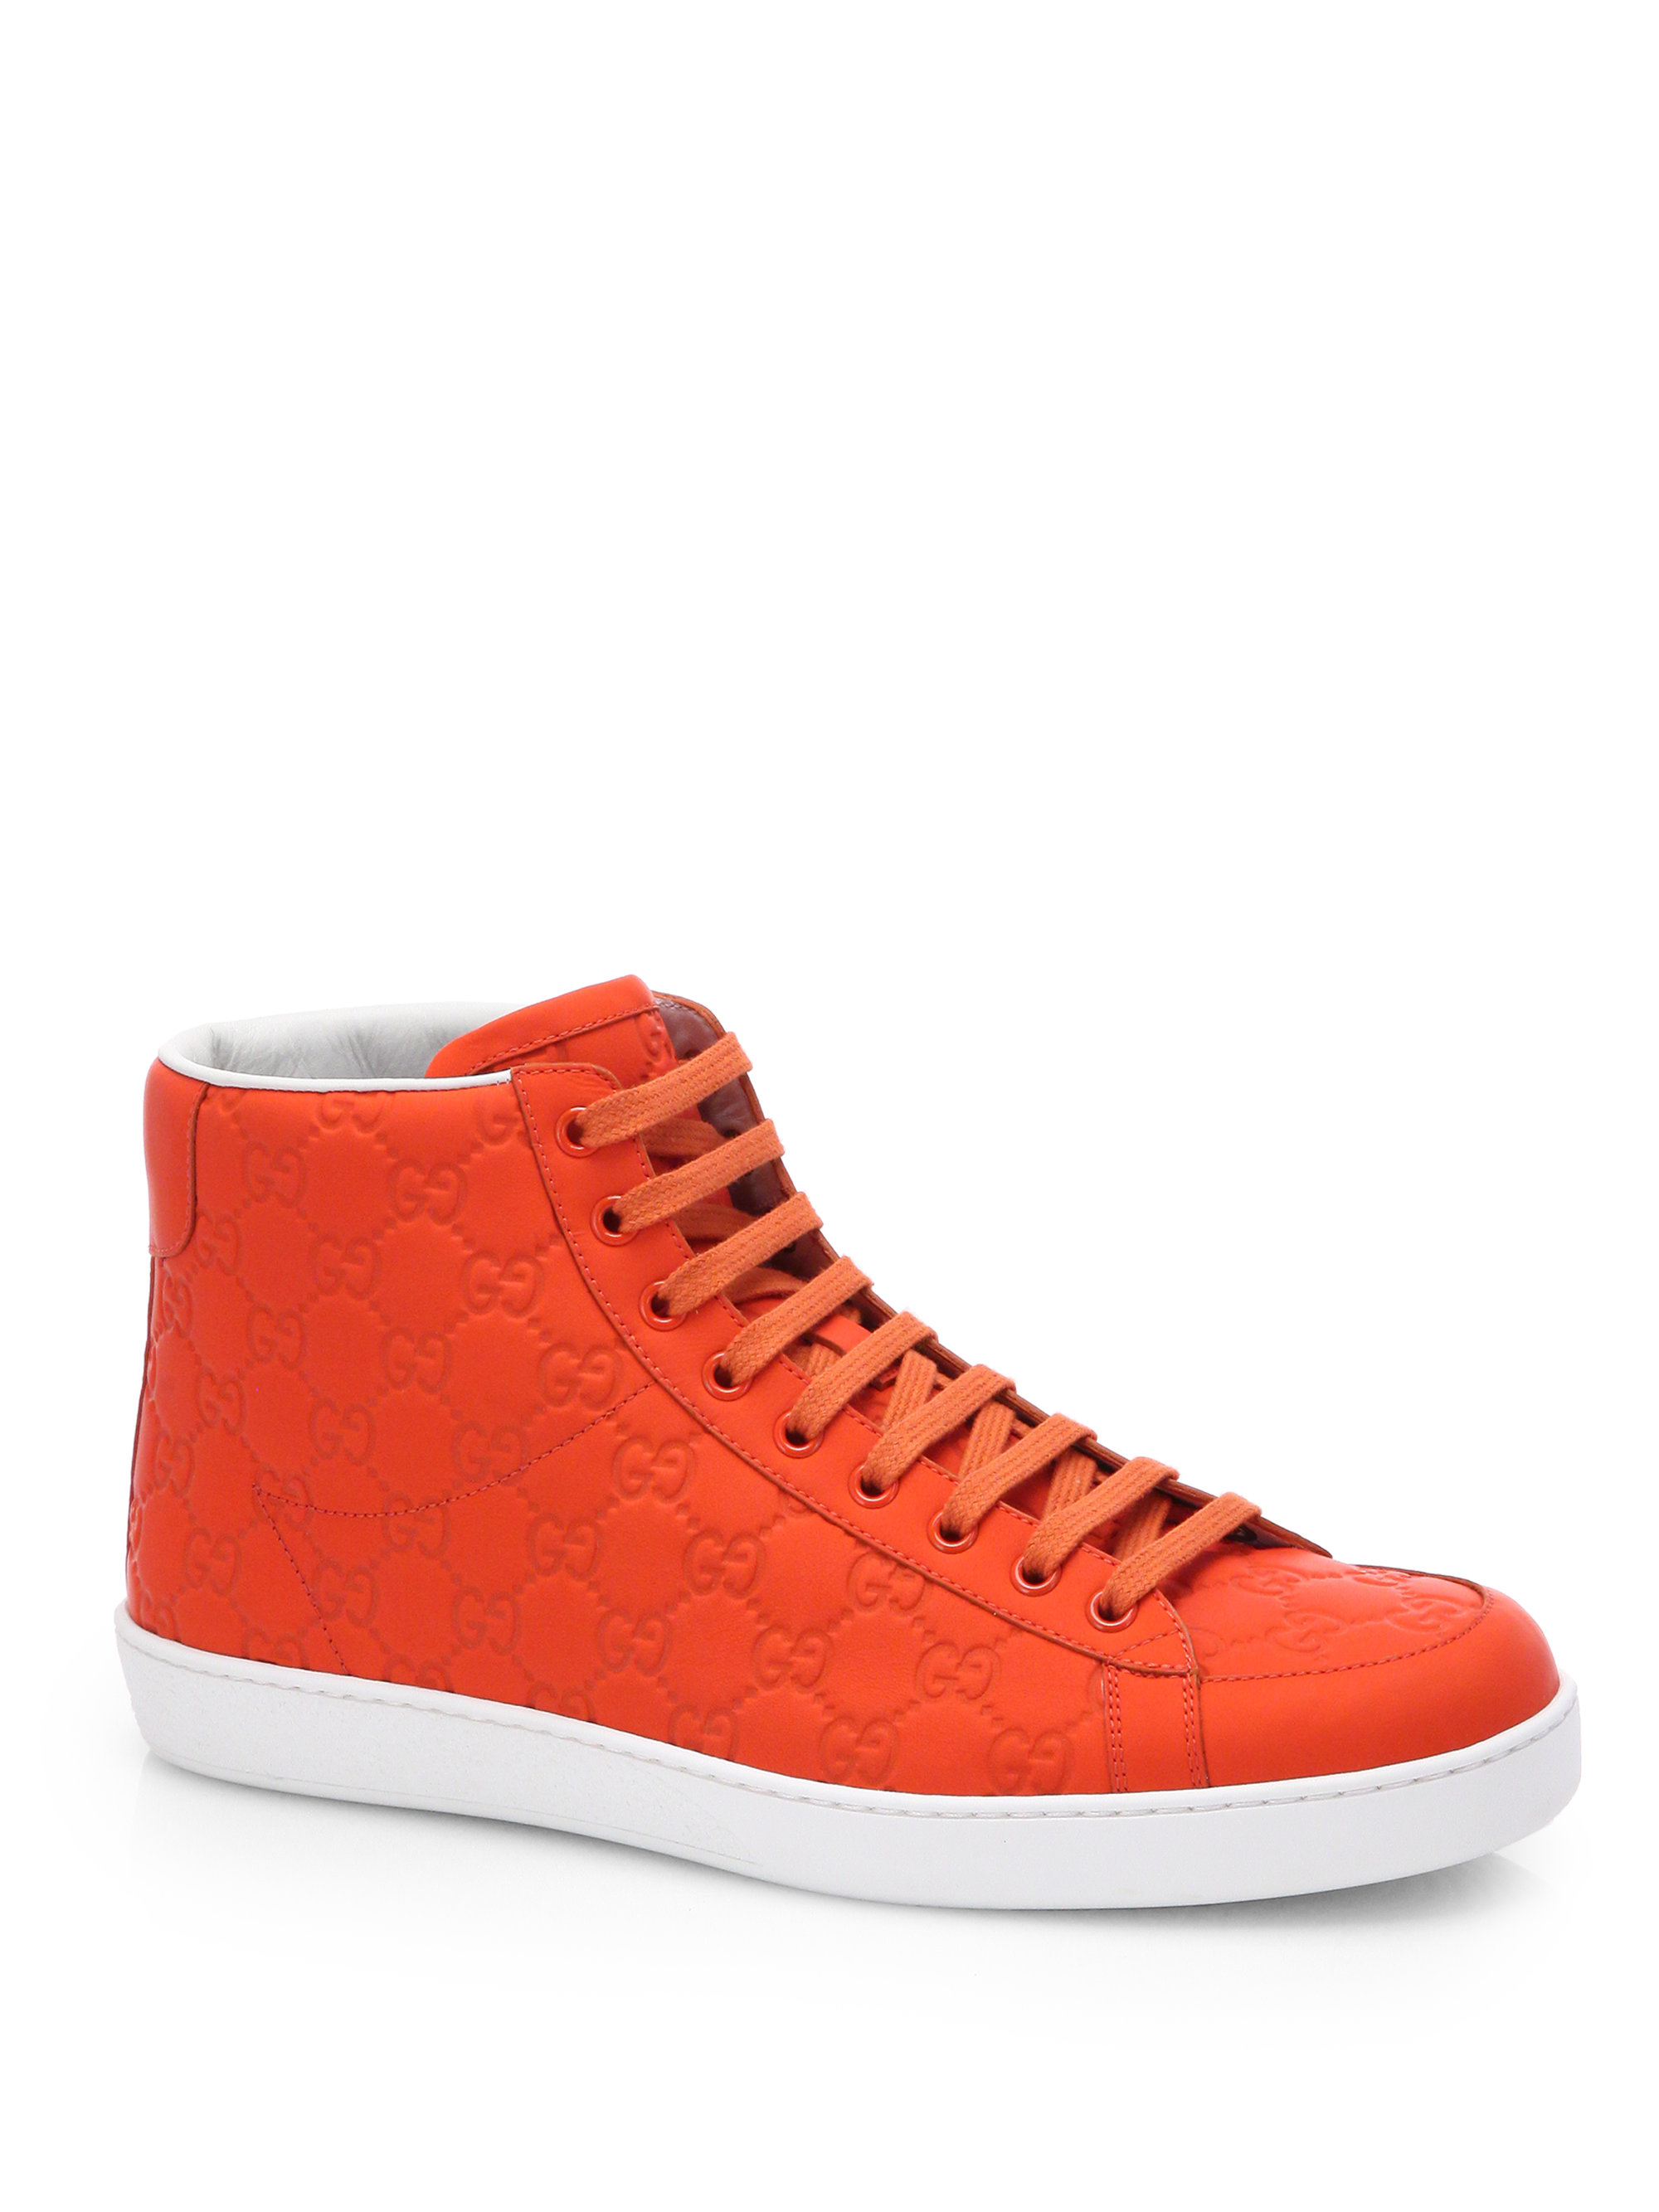 Gucci Rubberized Leather Gg Hightop Sneakers in Orange for ...